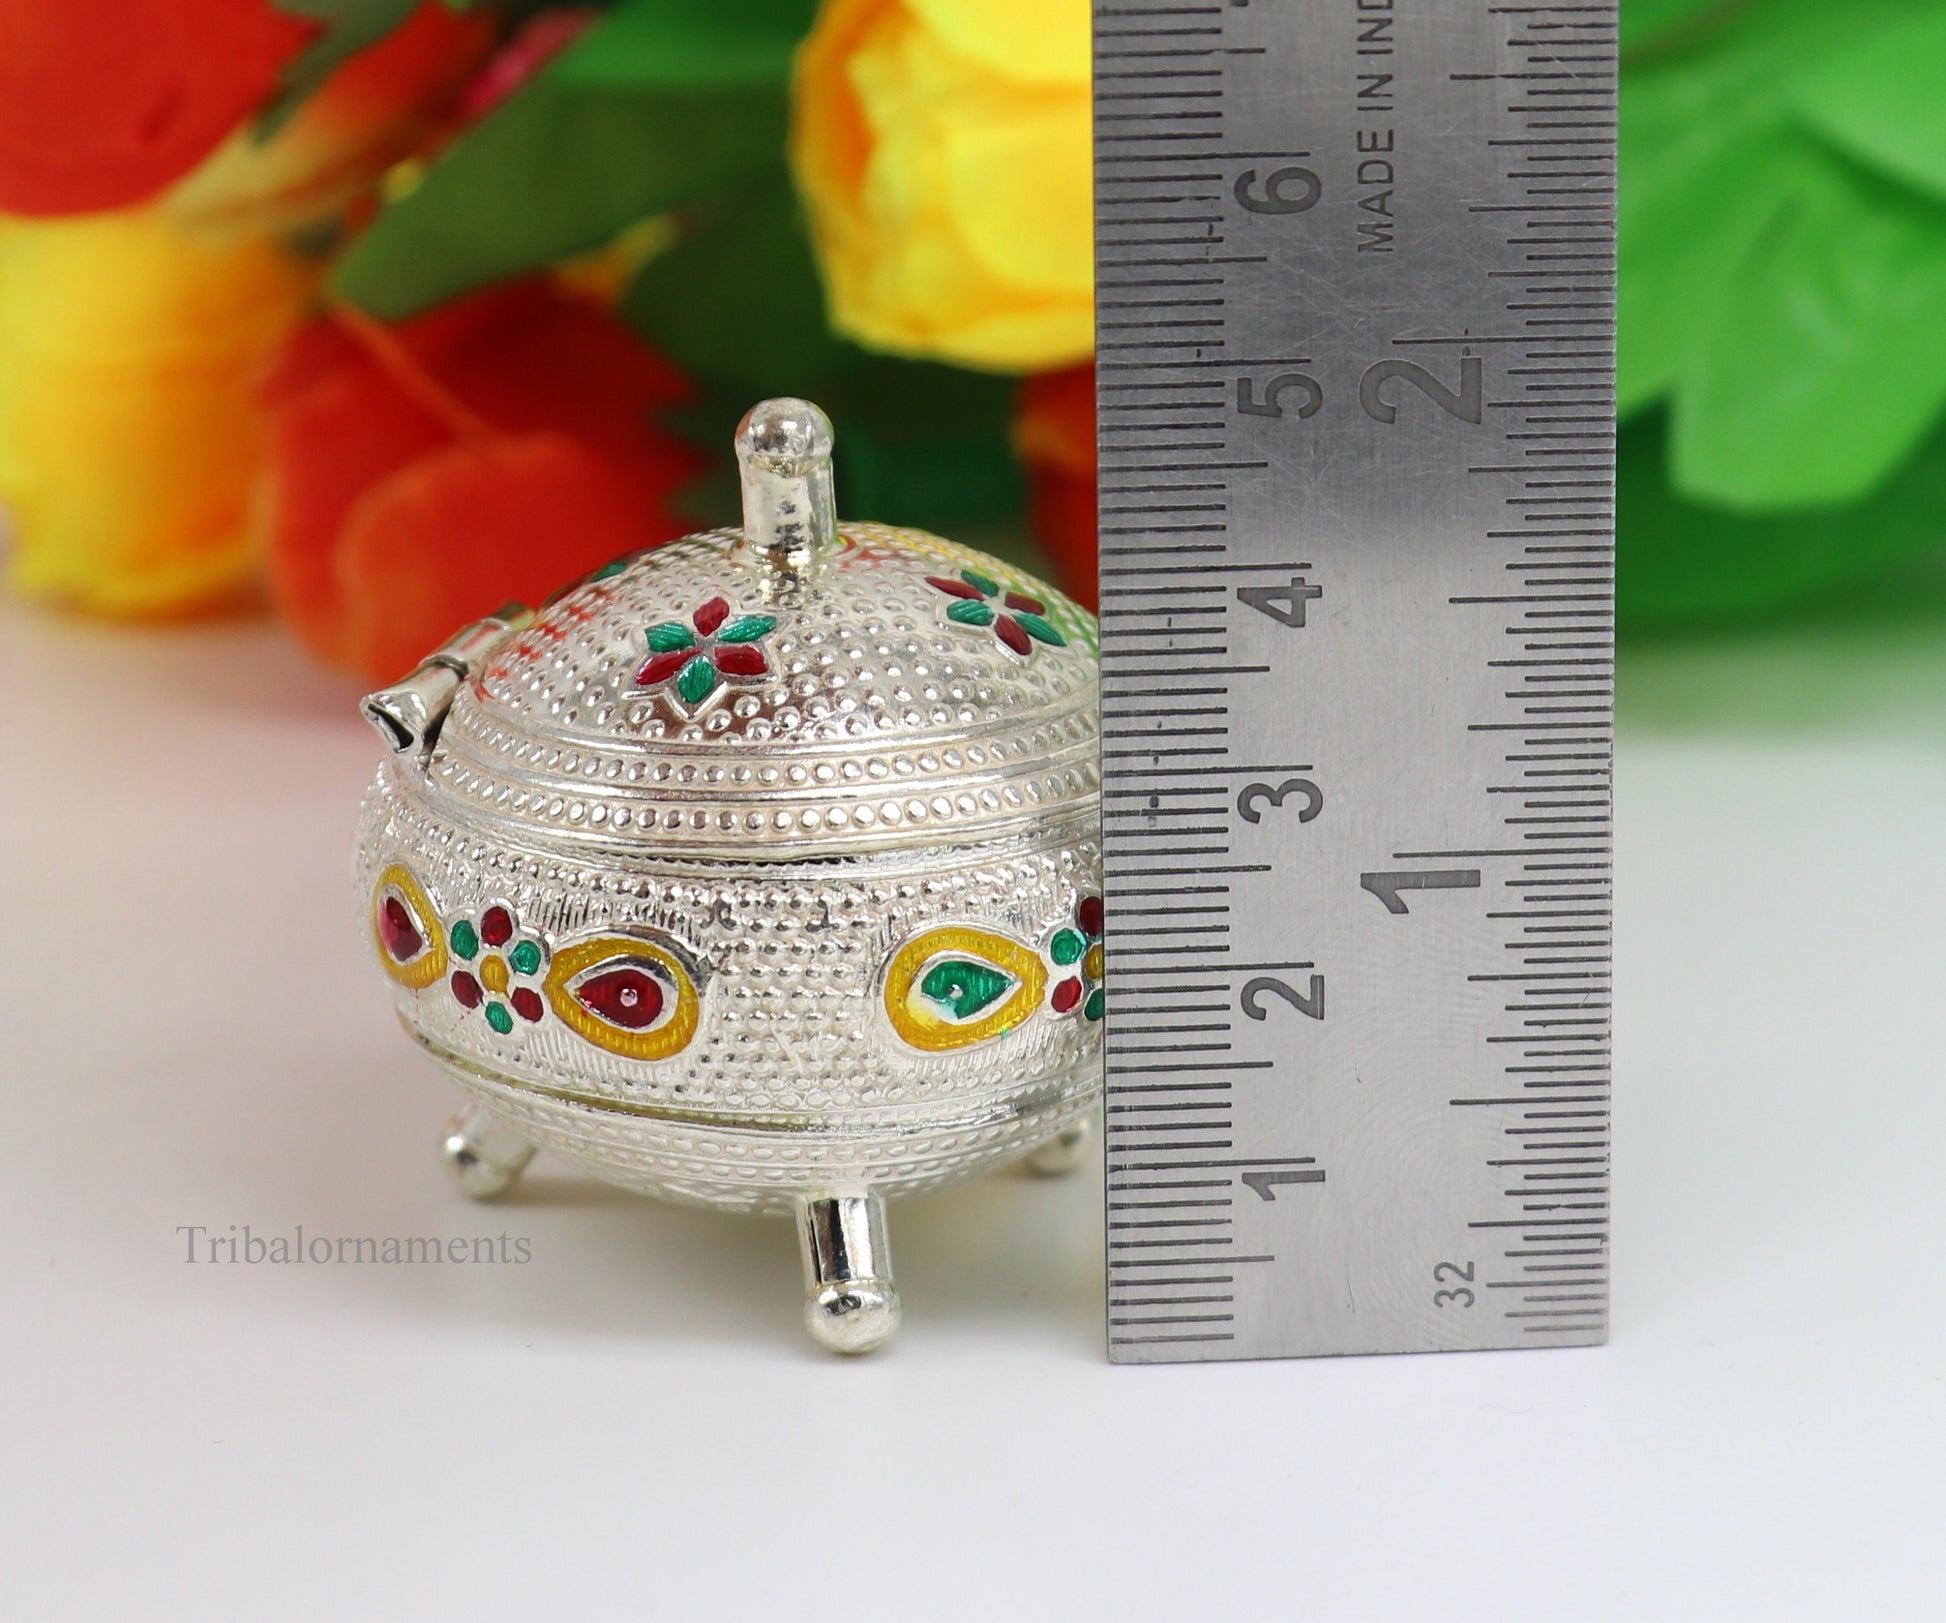 925 Sterling silver handmade fabulous trinket box, solid container box, casket box, sindoor box, enamel work customized gifting box stb186 - TRIBAL ORNAMENTS